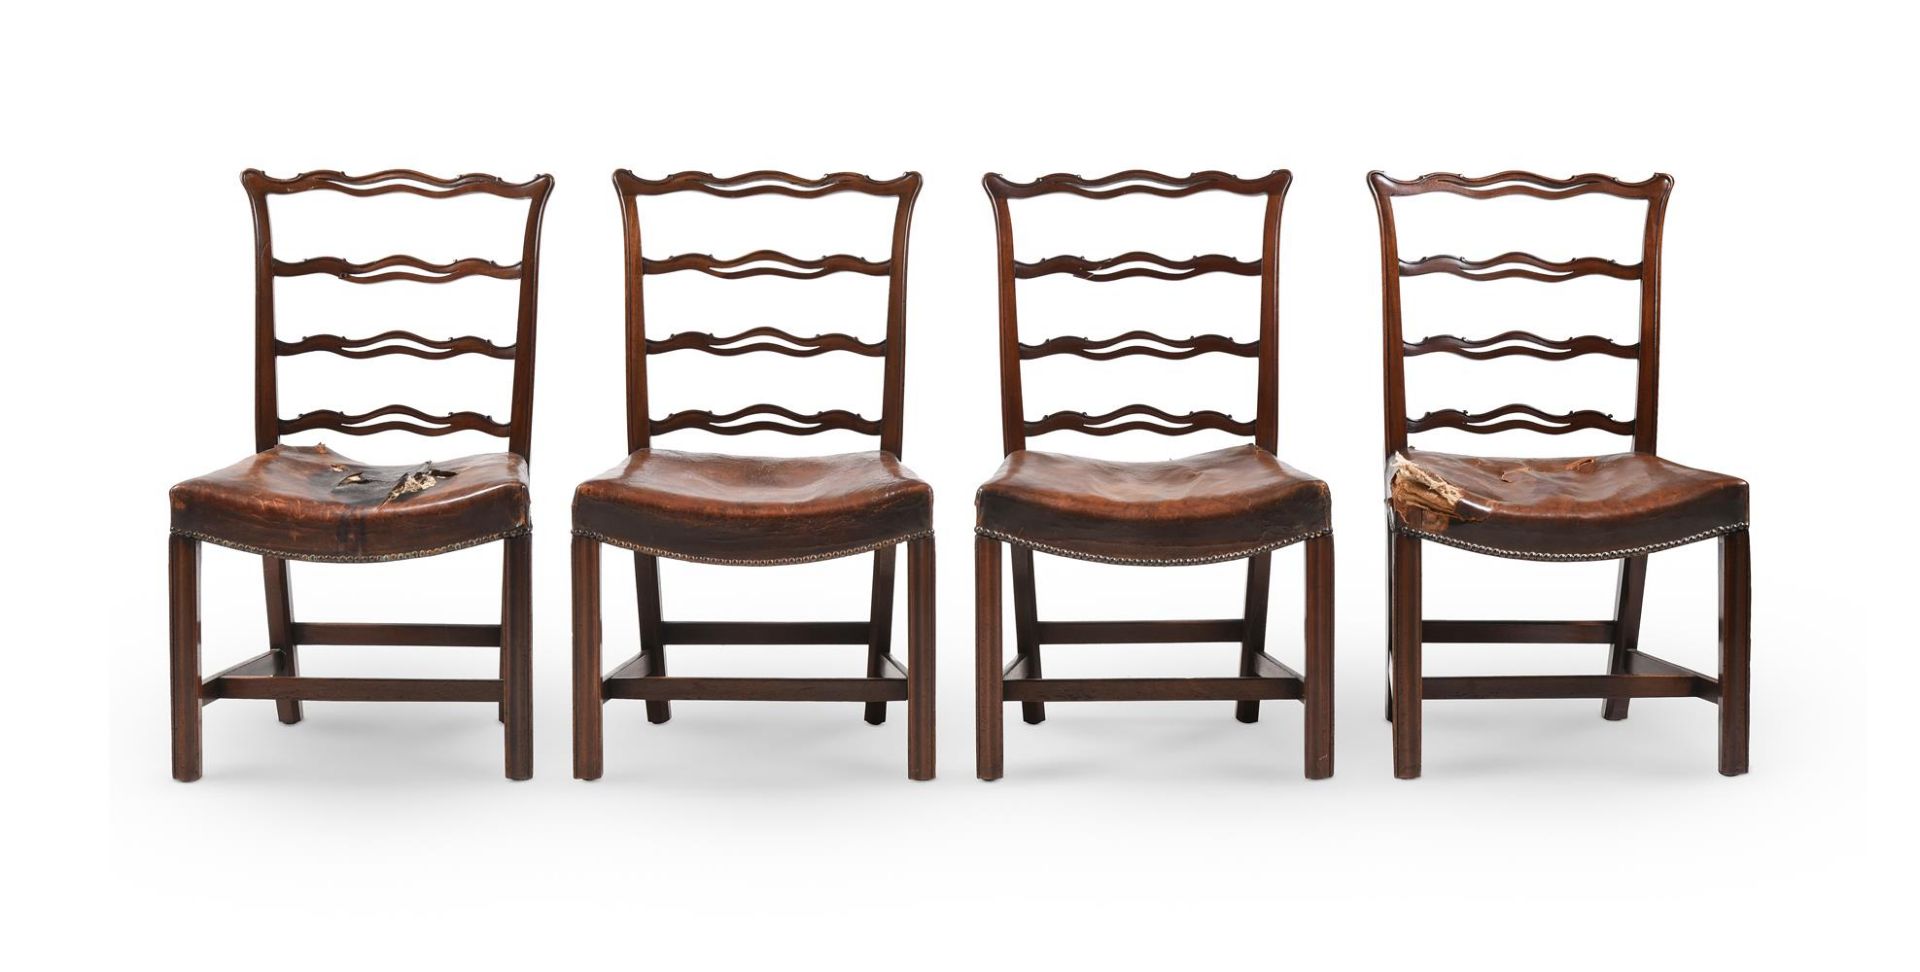 A HARLEQUIN SET OF FOURTEEN MAHOGANY AND UPHOLSTERED LADDERBACK DINING CHAIRS, LATE 19TH CENTURY - Image 5 of 6